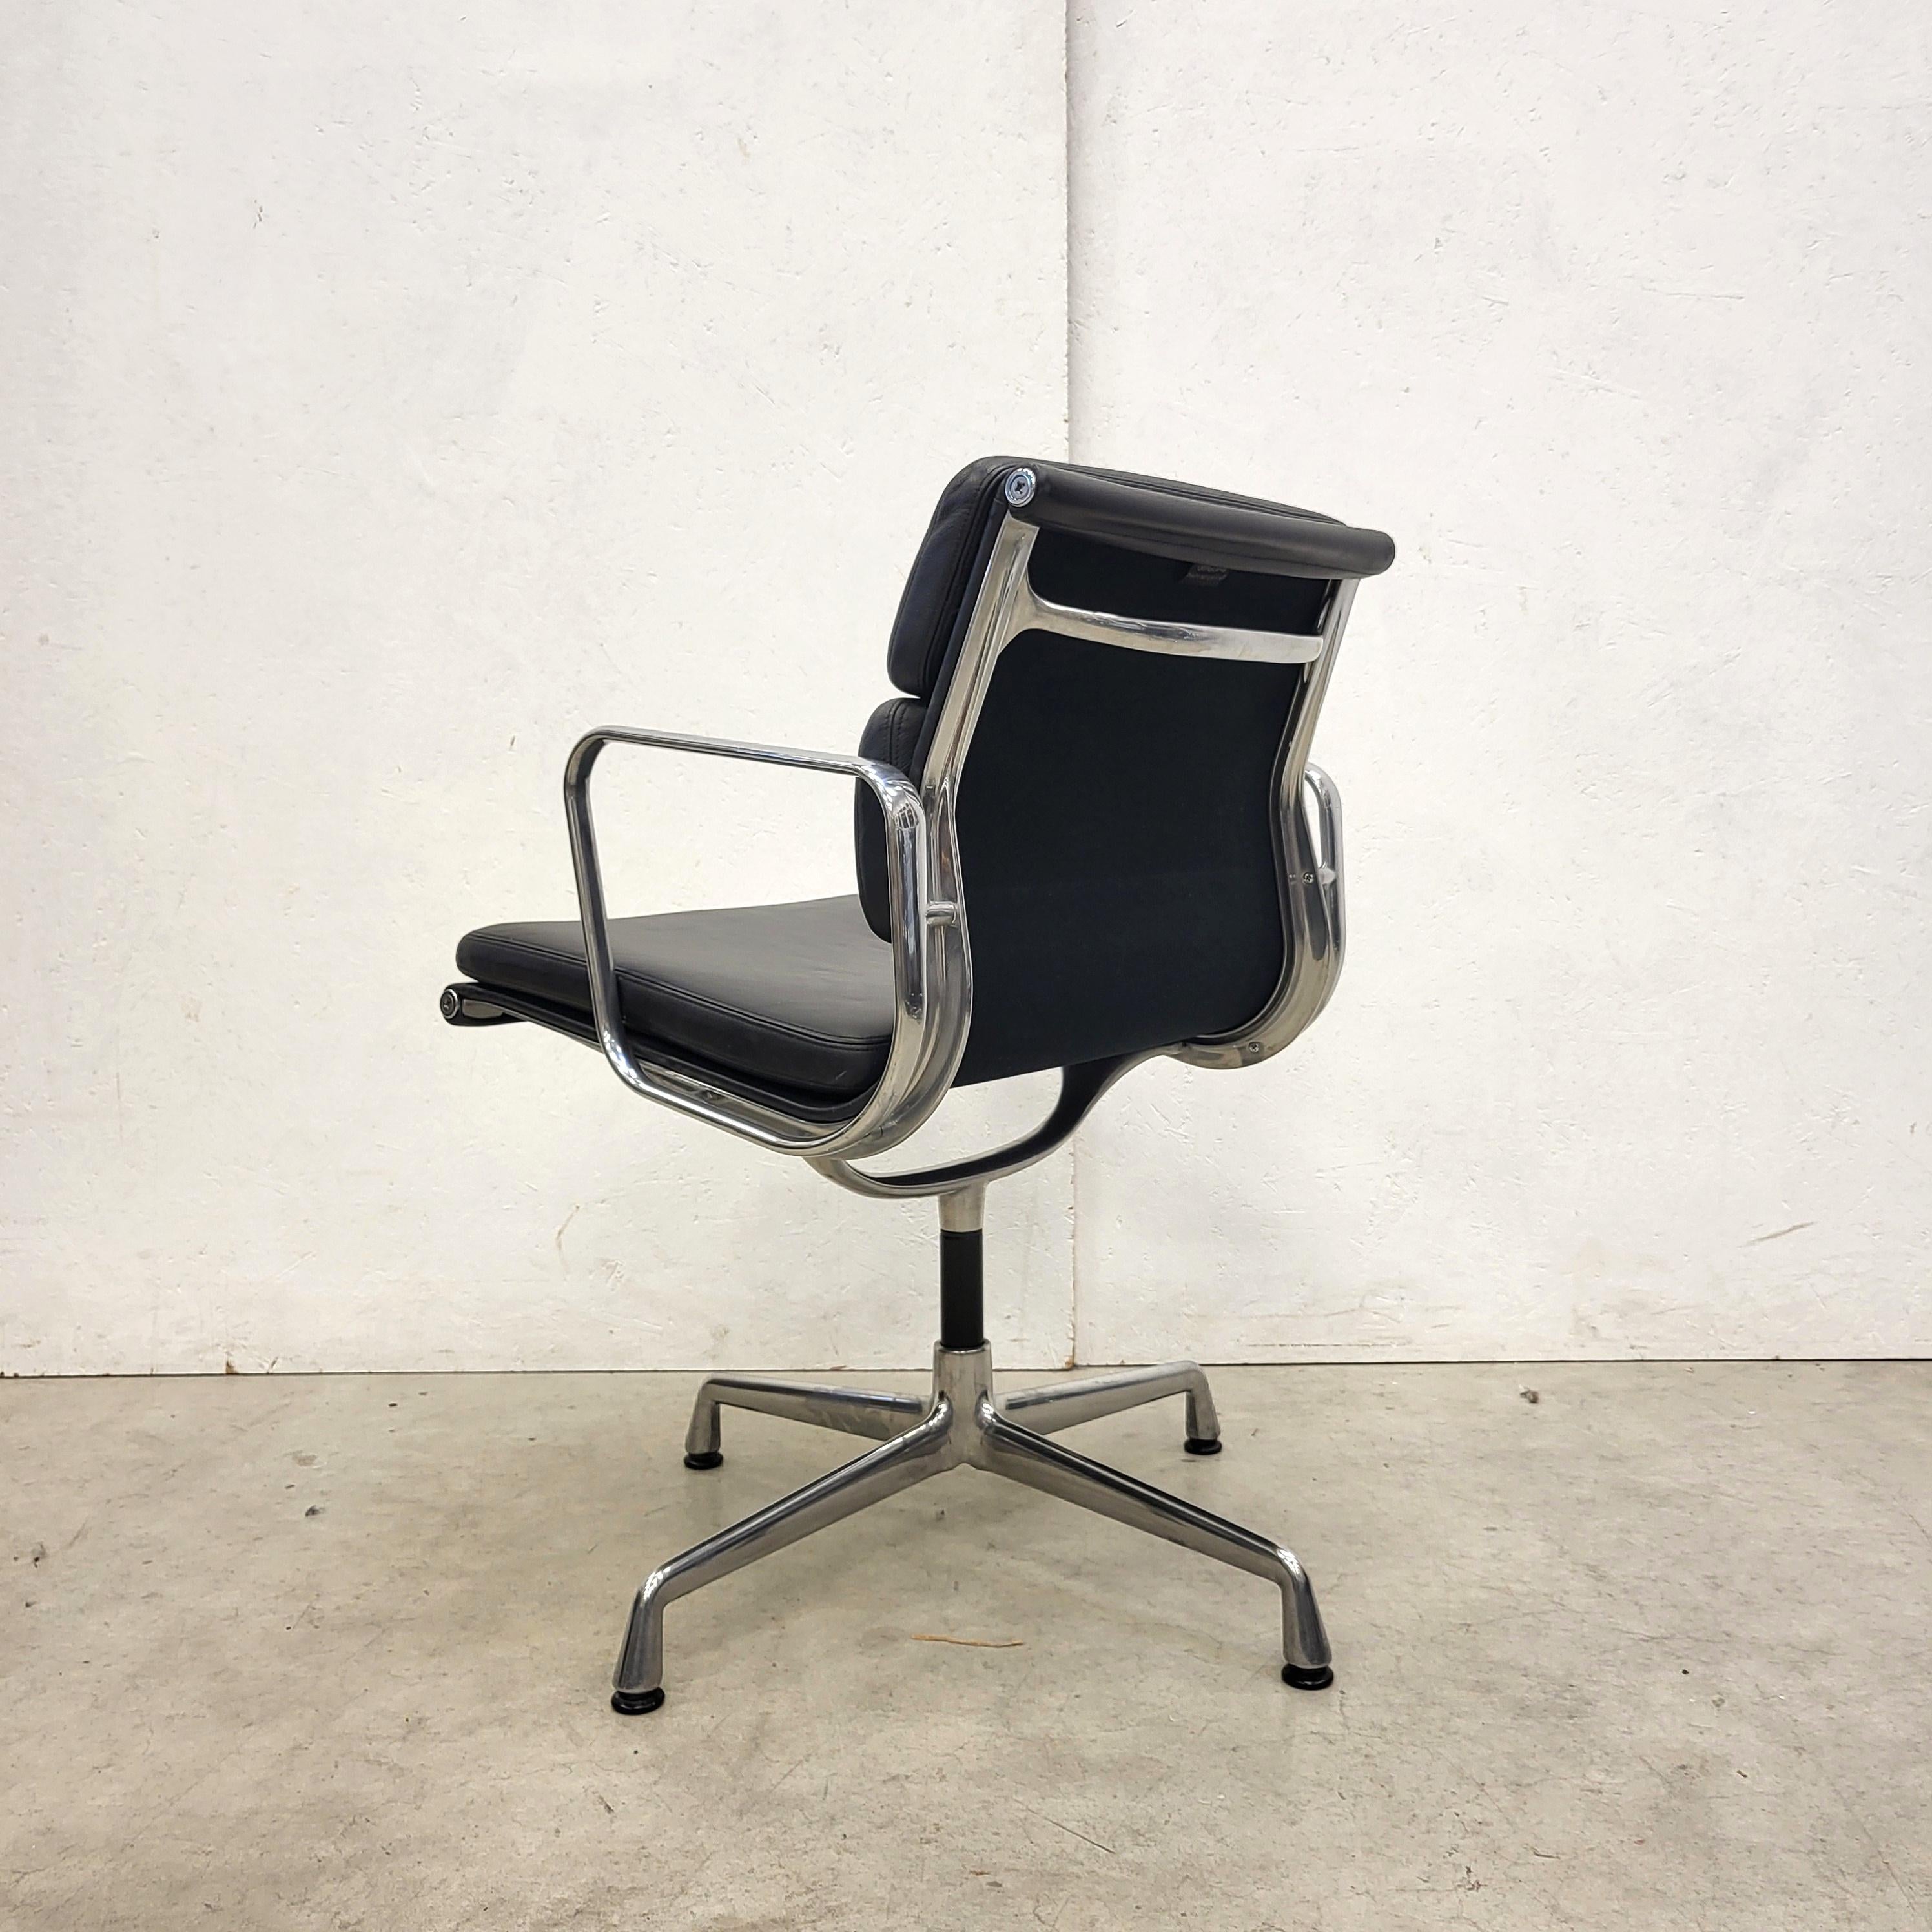 Contemporary 4x Vitra EA208 Soft Pad Office Chair by Charles Eames, 2006 Model